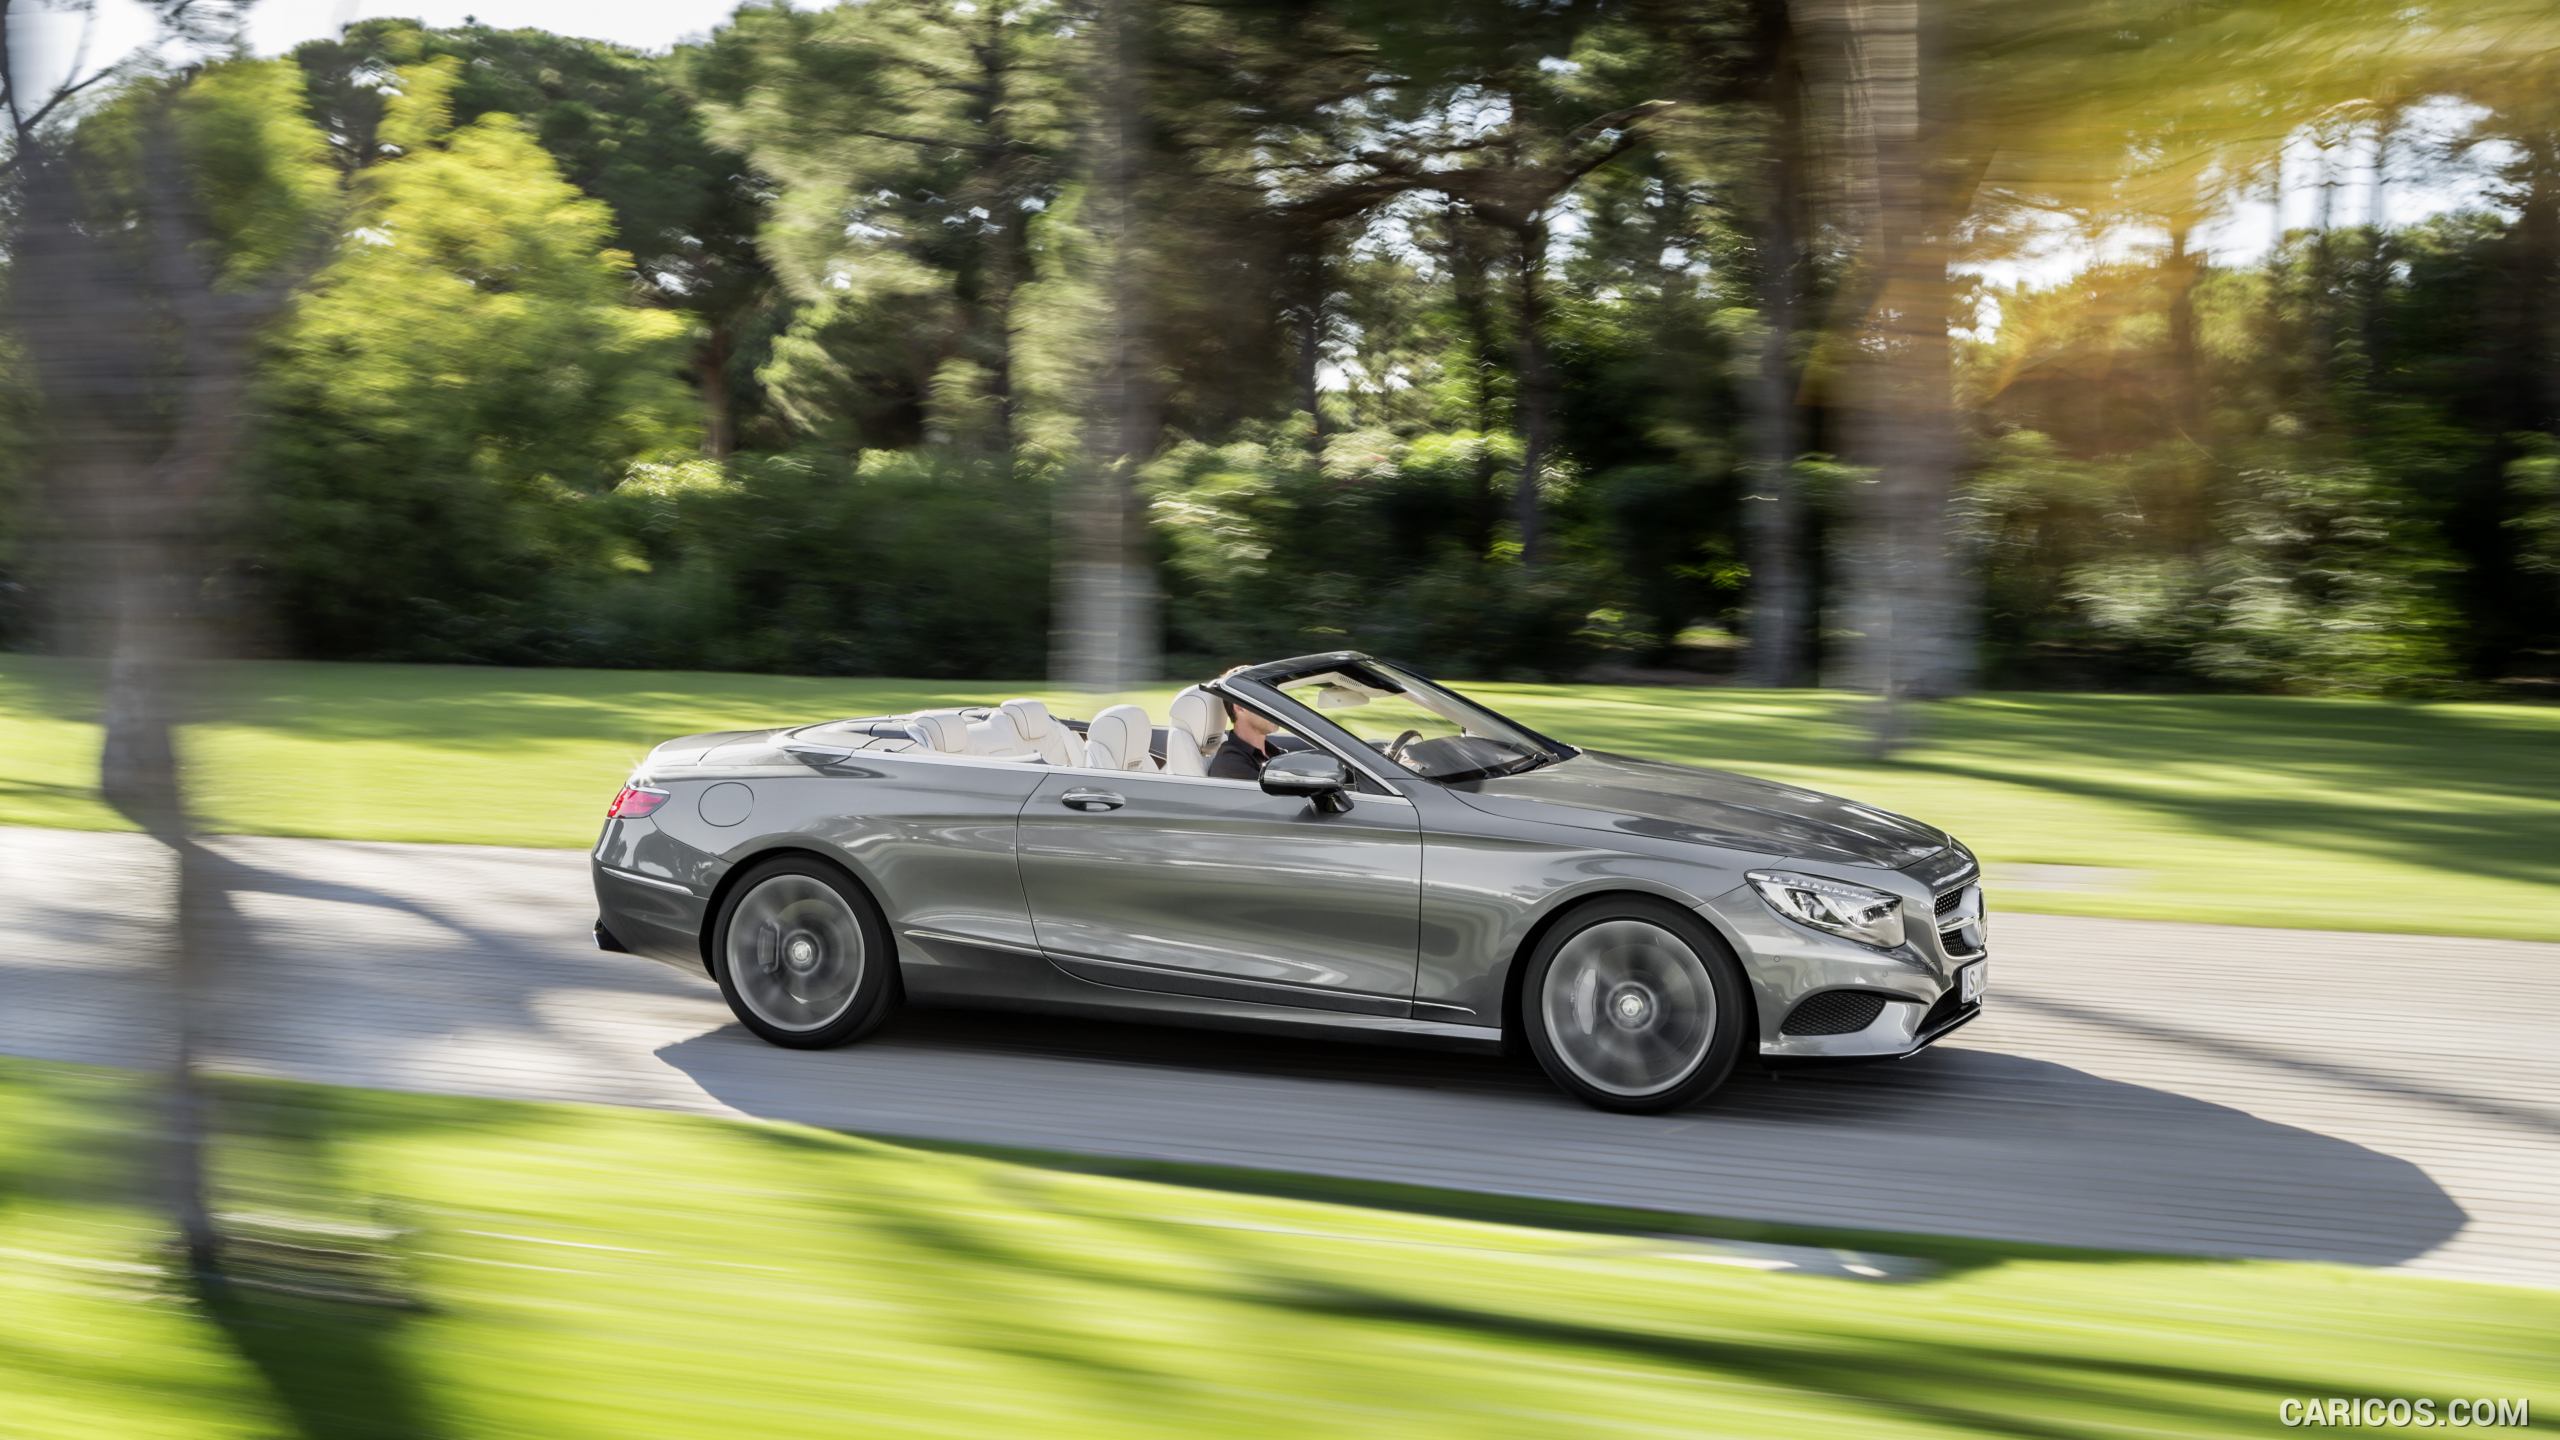 2017 Mercedes-Benz S-Class S500 Cabriolet (Selenit Grey) - Side, #1 of 56